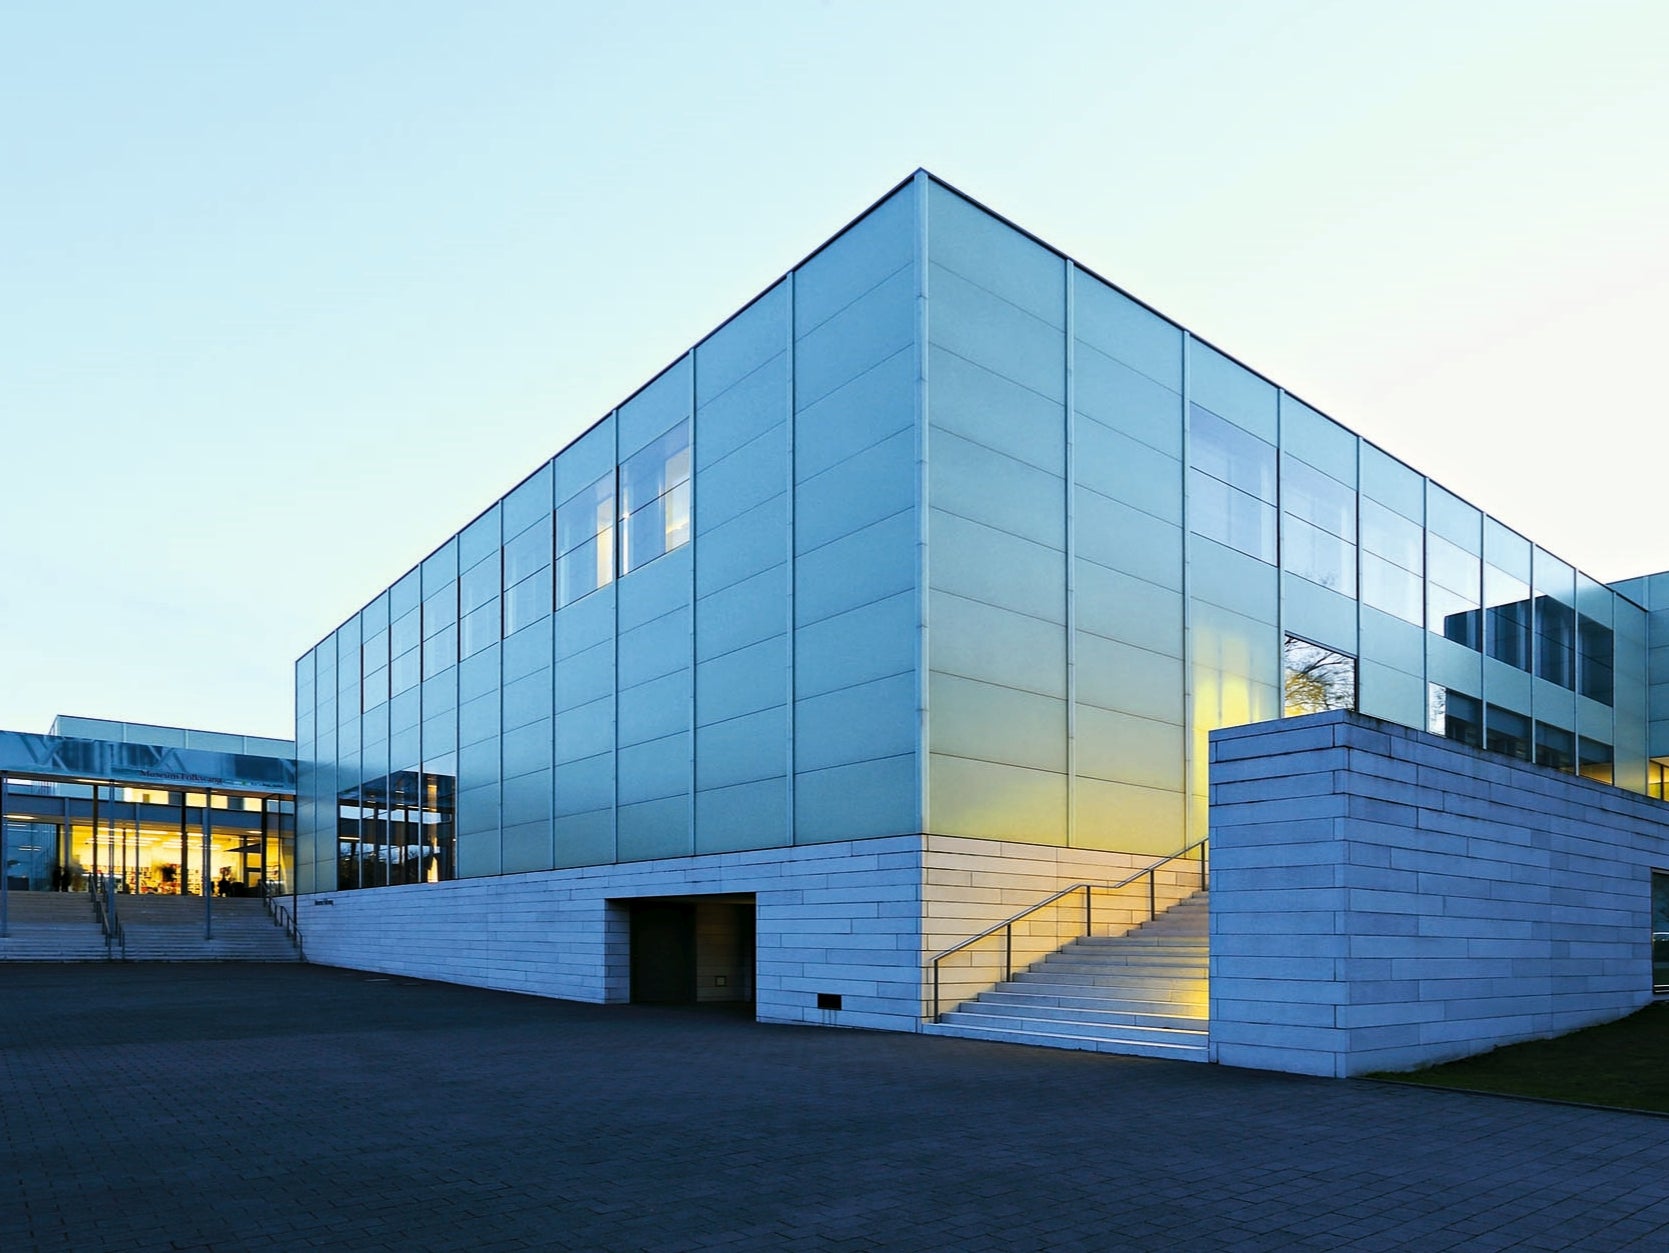 The Folkwang Museum in Essen was founded in 1922 but now inhabits a Modernist structure built in the 1950s, which was significantly extended in 2010